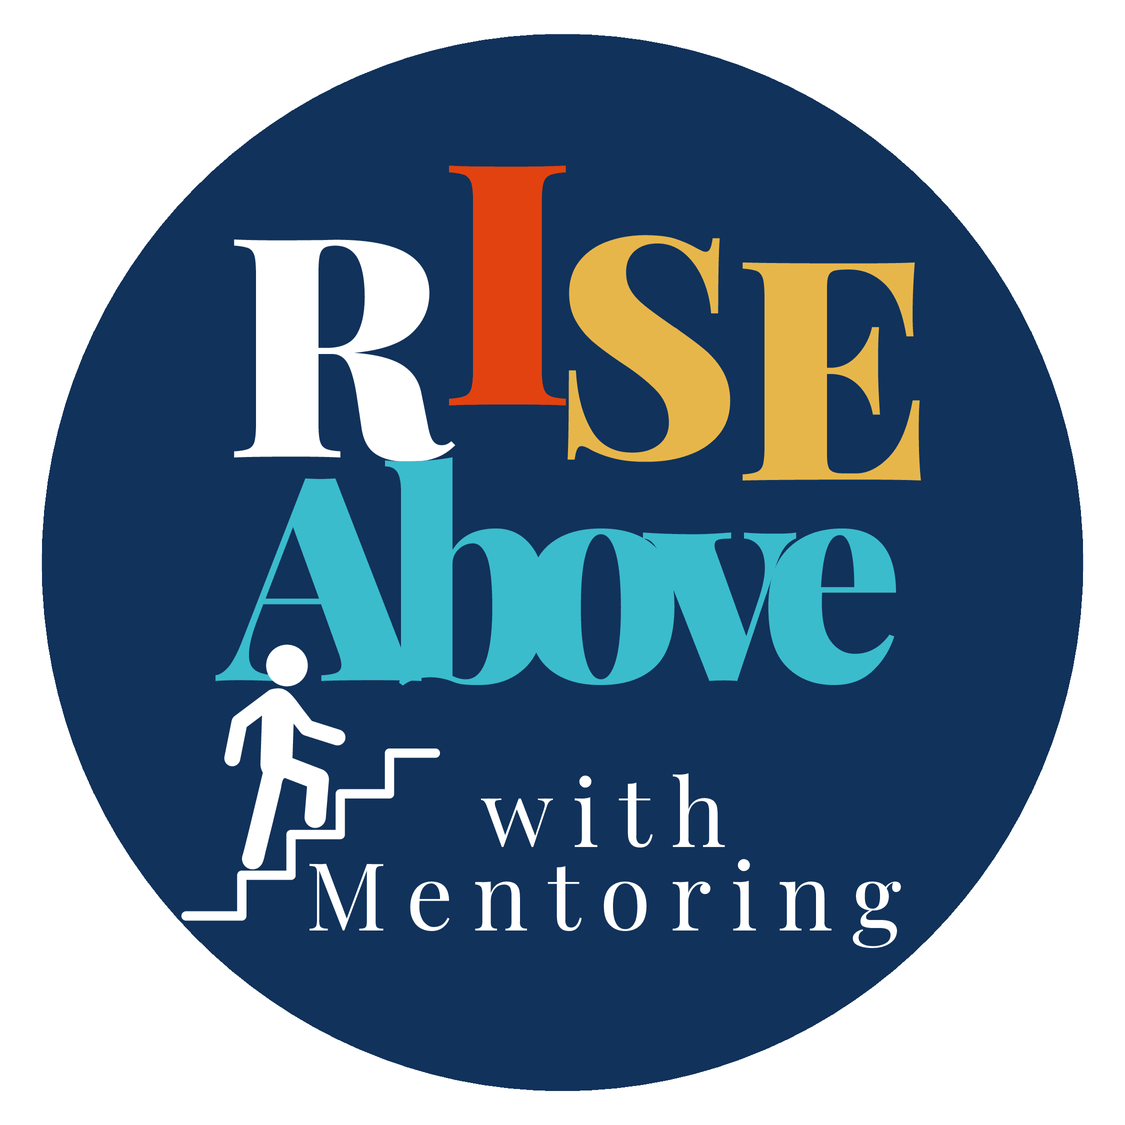 Rise Above Situations logo
Supporting people, empowering people through mentoring. Rise up from mental illness, domestic abuse and other life challenges. 

We are based in Maidstone, kent